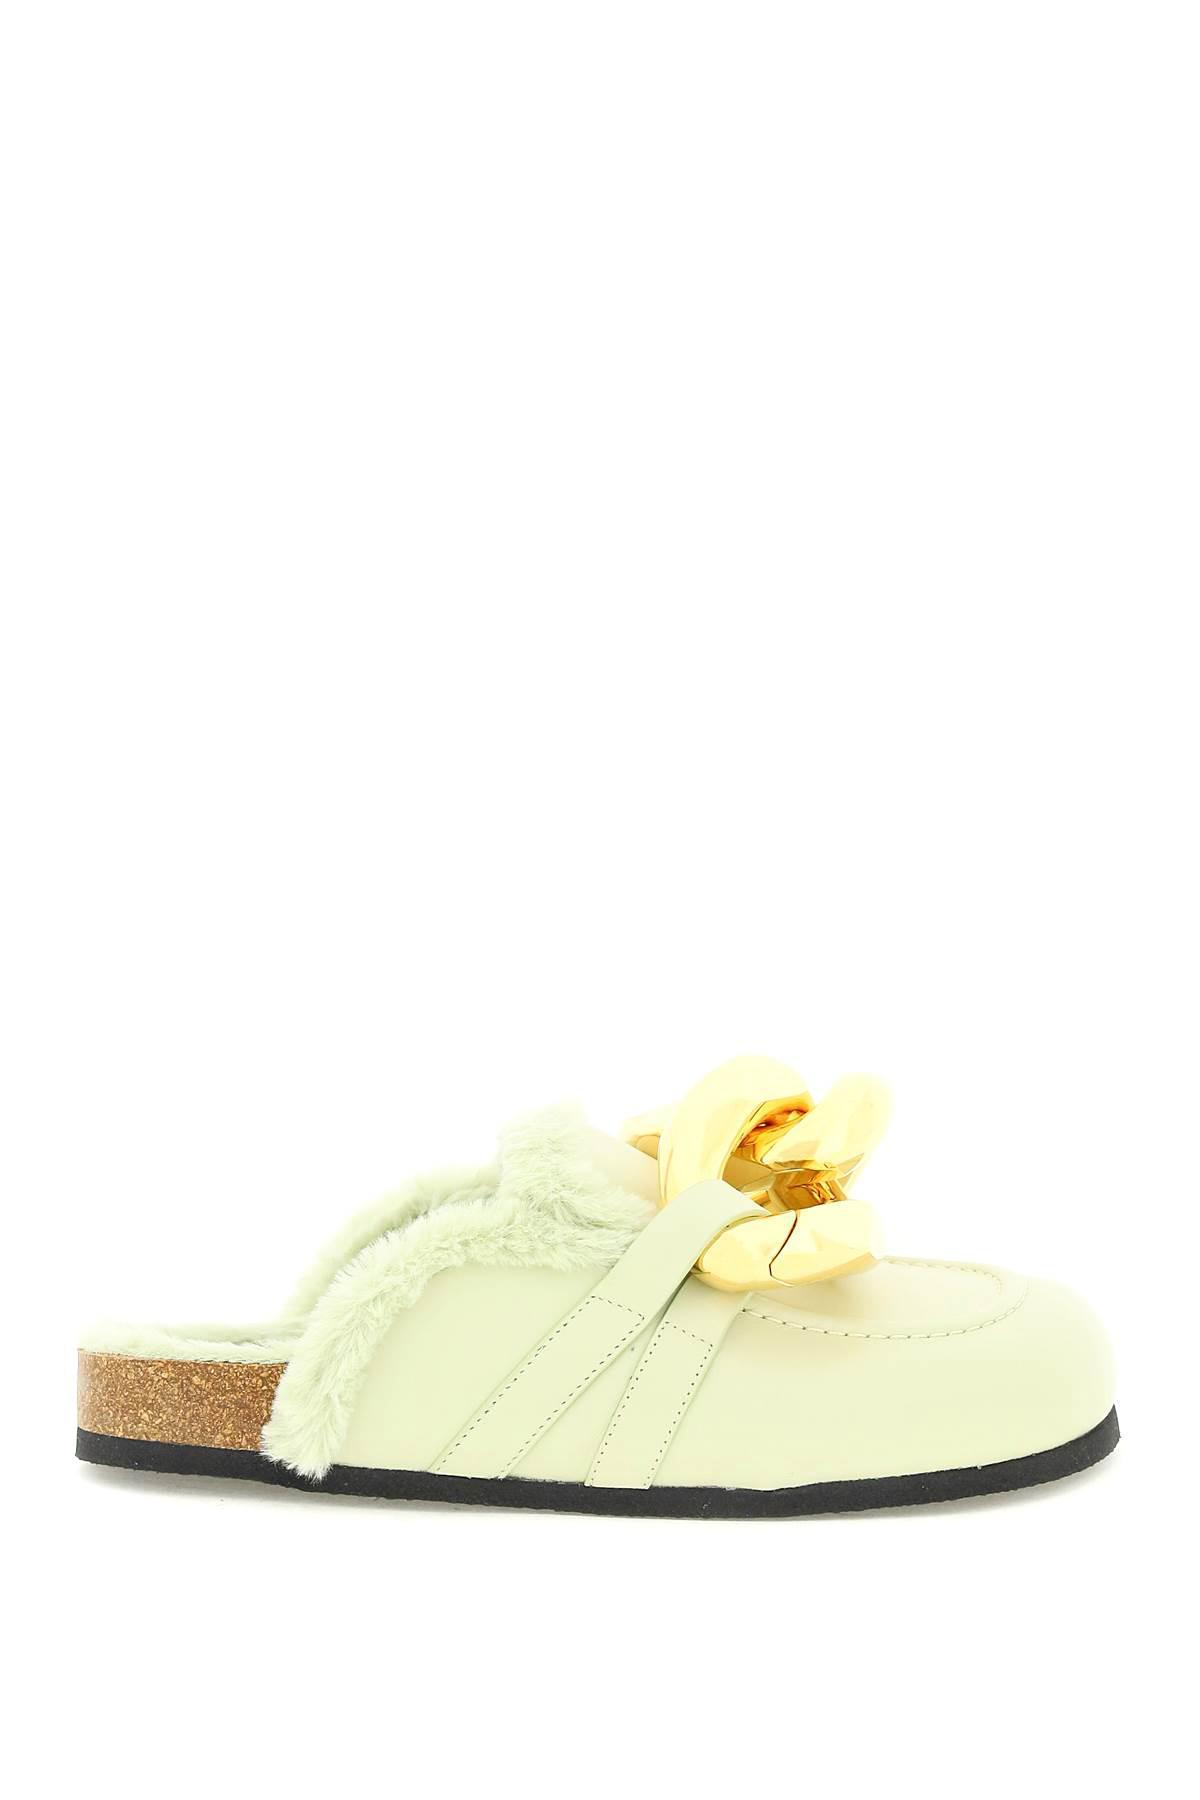 JW Anderson Leather Chain Mules With Ecofur Lining in Yellow | Lyst